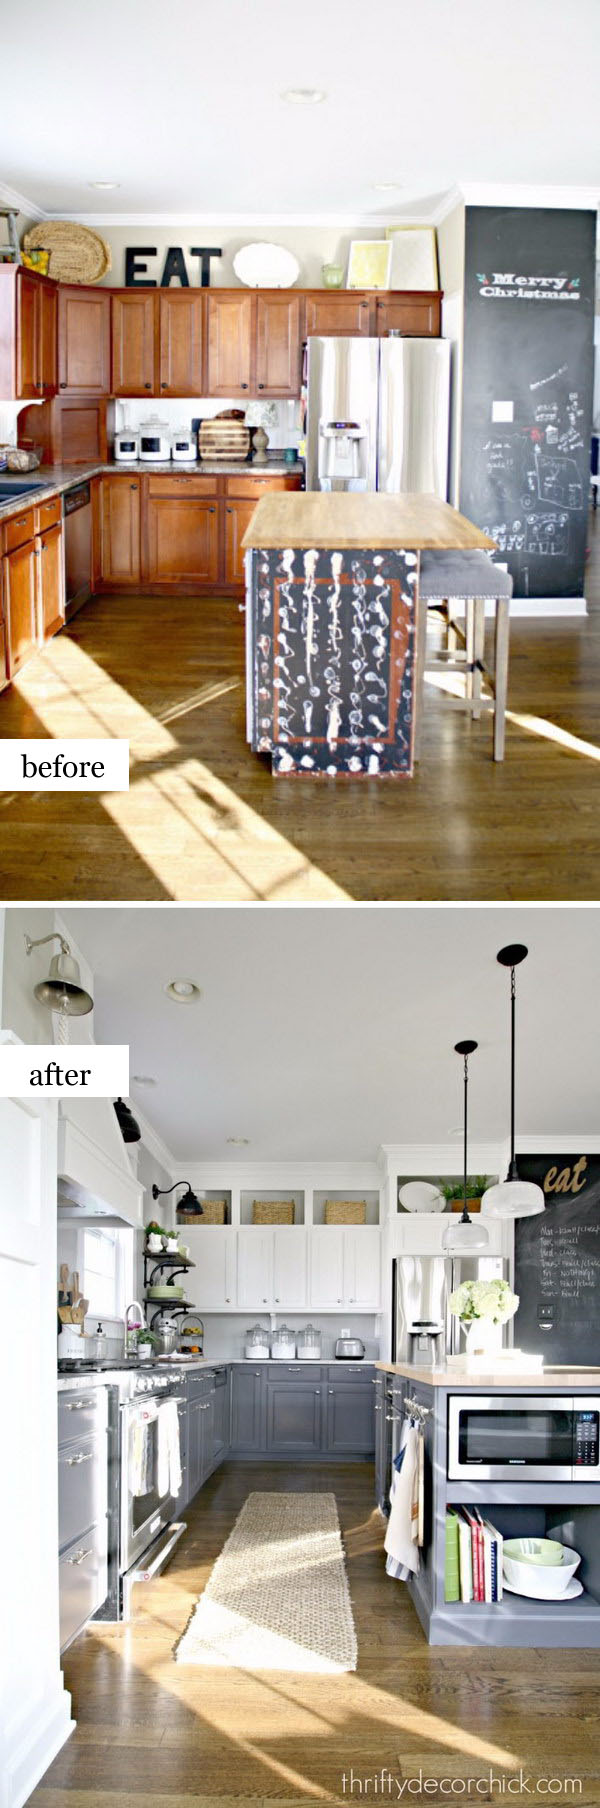 Pretty Before And After Kitchen Makeovers   Noted List